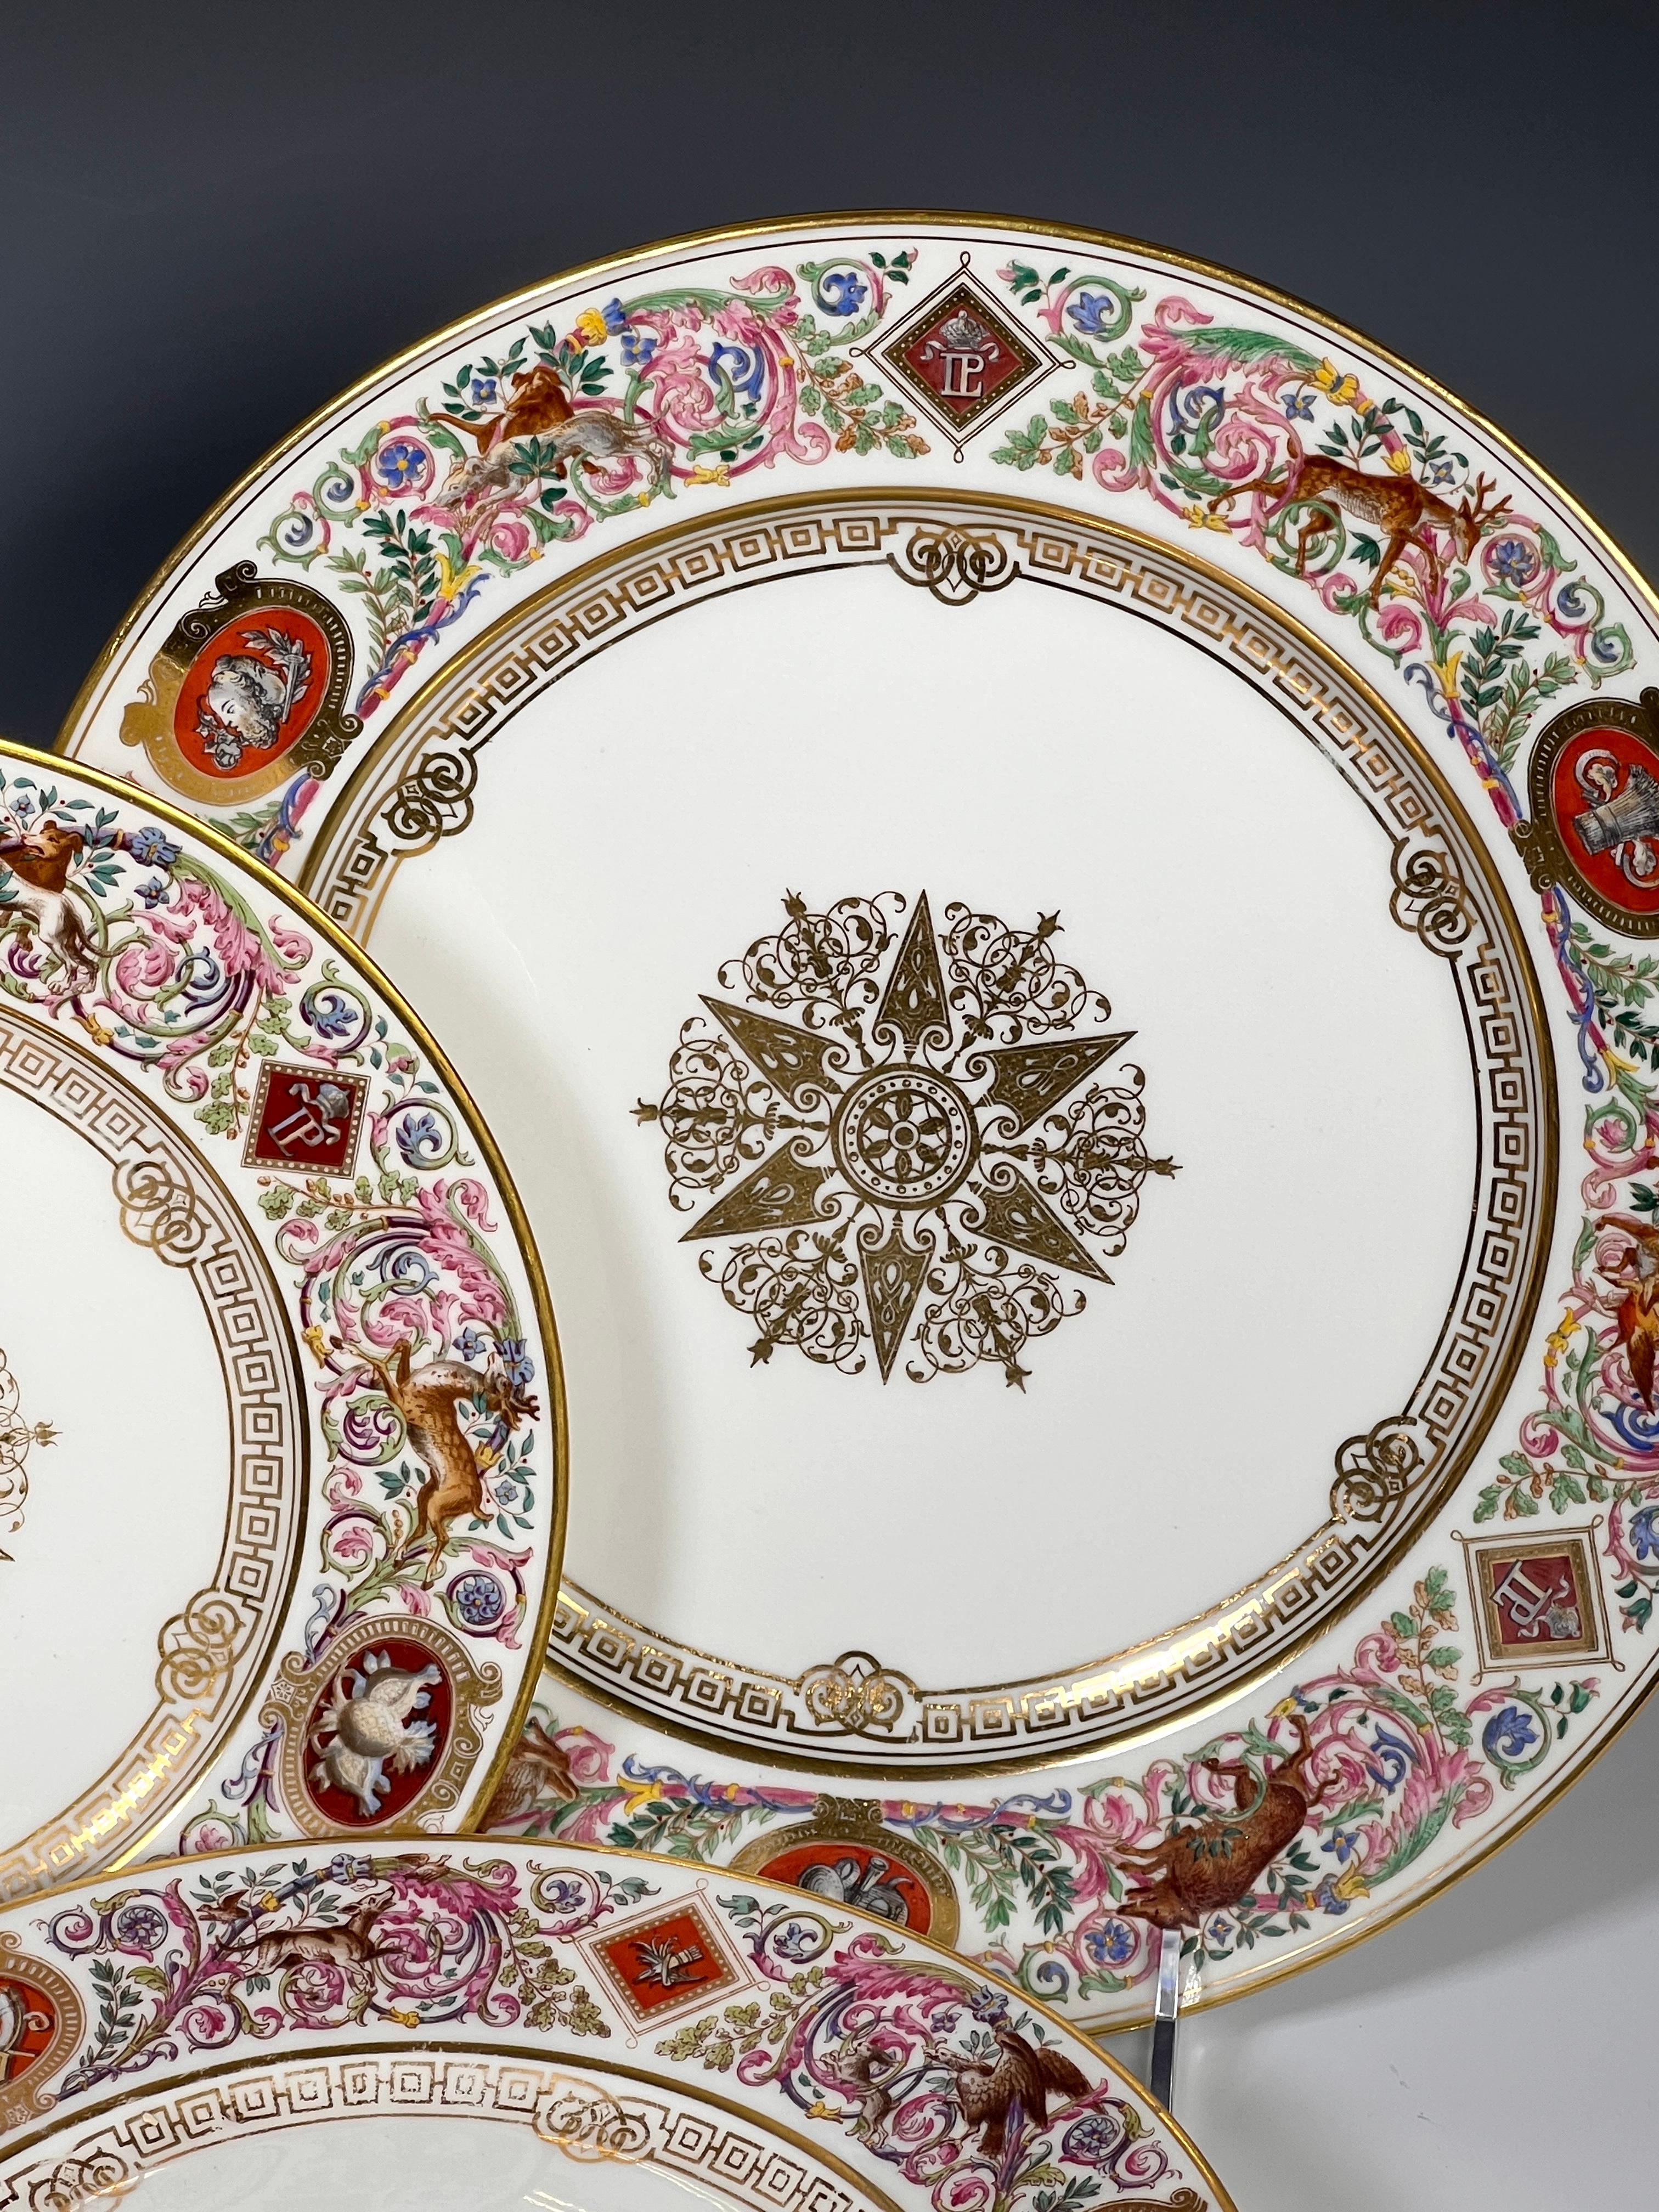 French Sevres Louis-Phillipe Dinner Service for 12 Chateau Fontainebleau 1846- 1850 Pcs For Sale